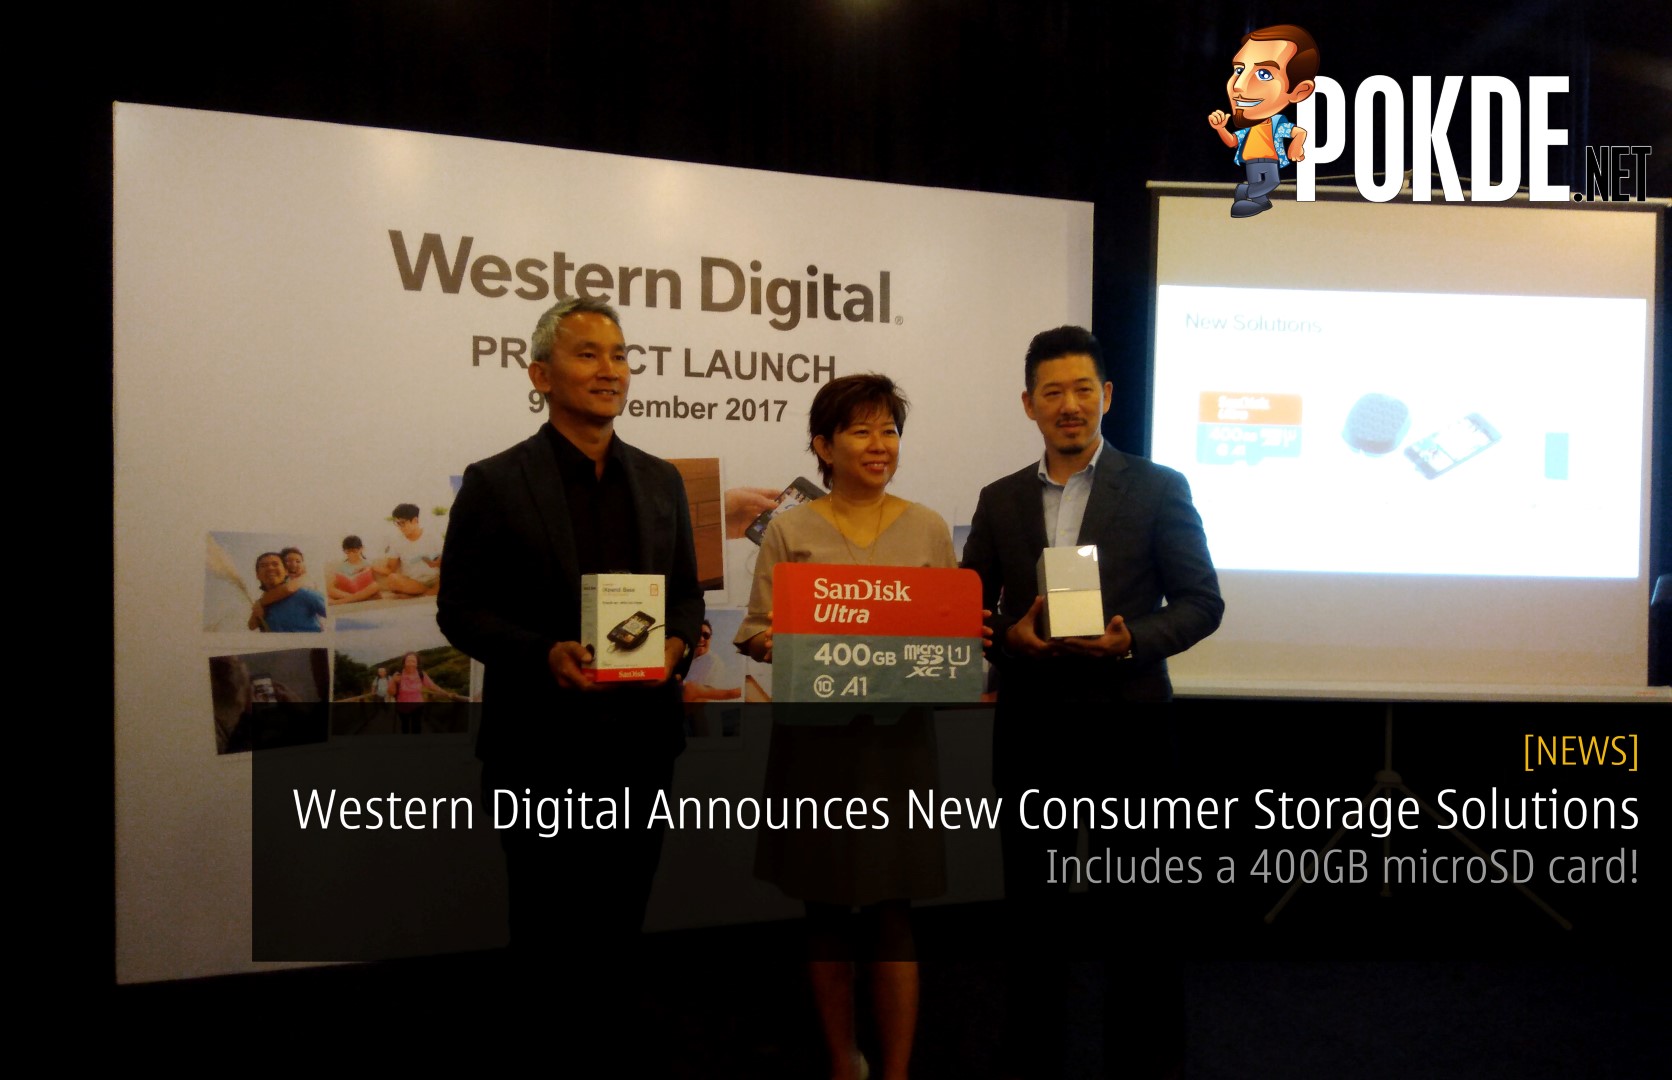 Western Digital Announces New Consumer Storage Solutions - Includes a 400GB microSD card! 33